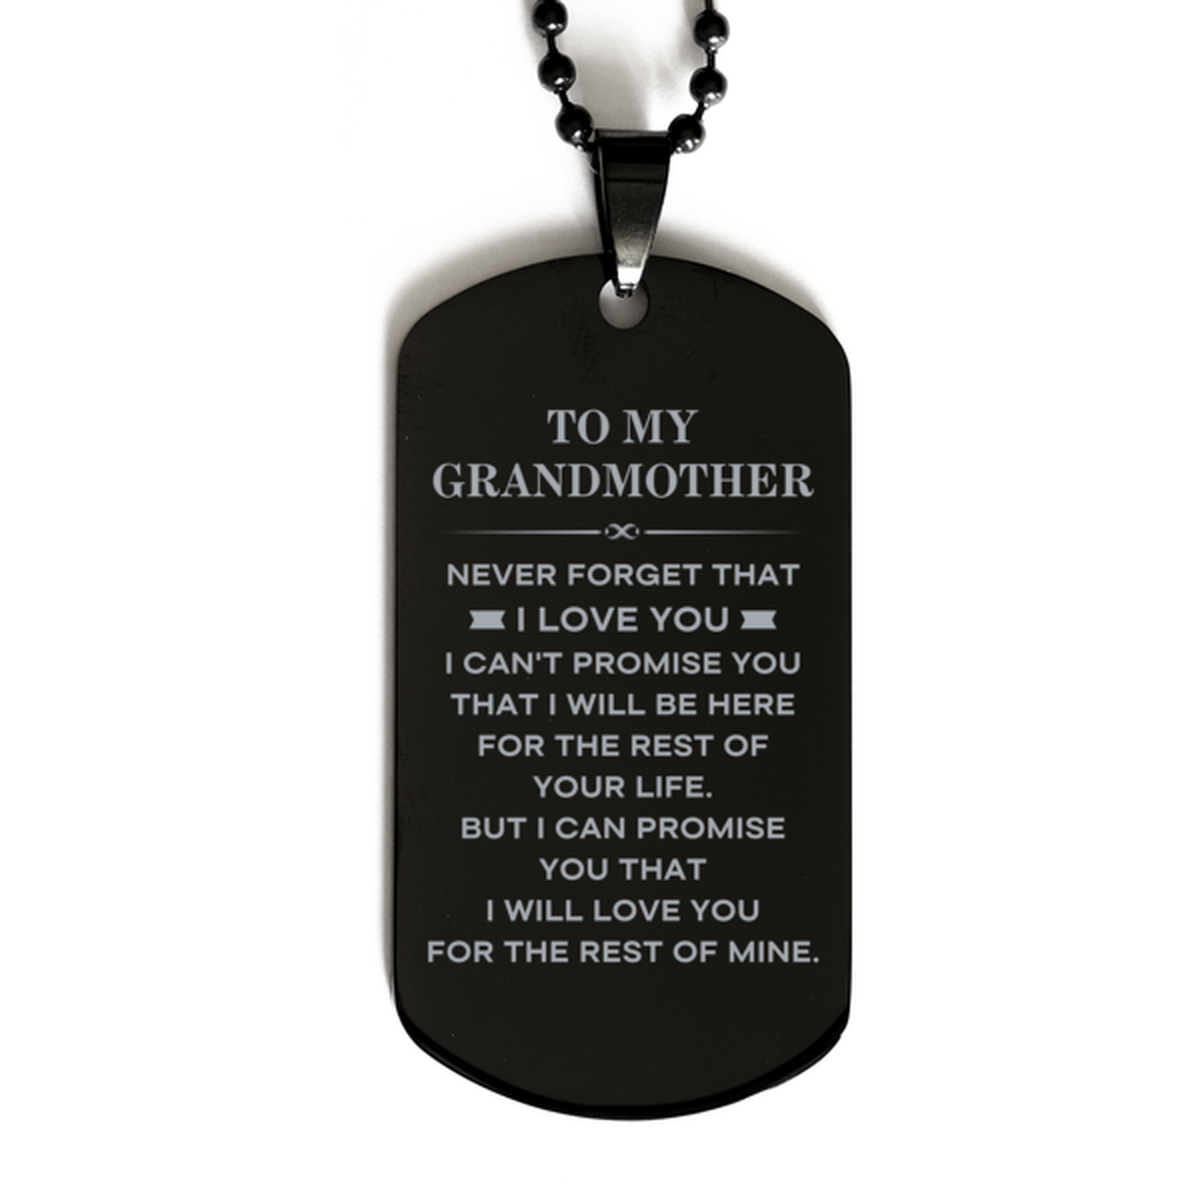 To My Grandmother Gifts, I will love you for the rest of mine, Love Grandmother Dog Tag Necklace, Birthday Christmas Unique Black Dog Tag For Grandmother